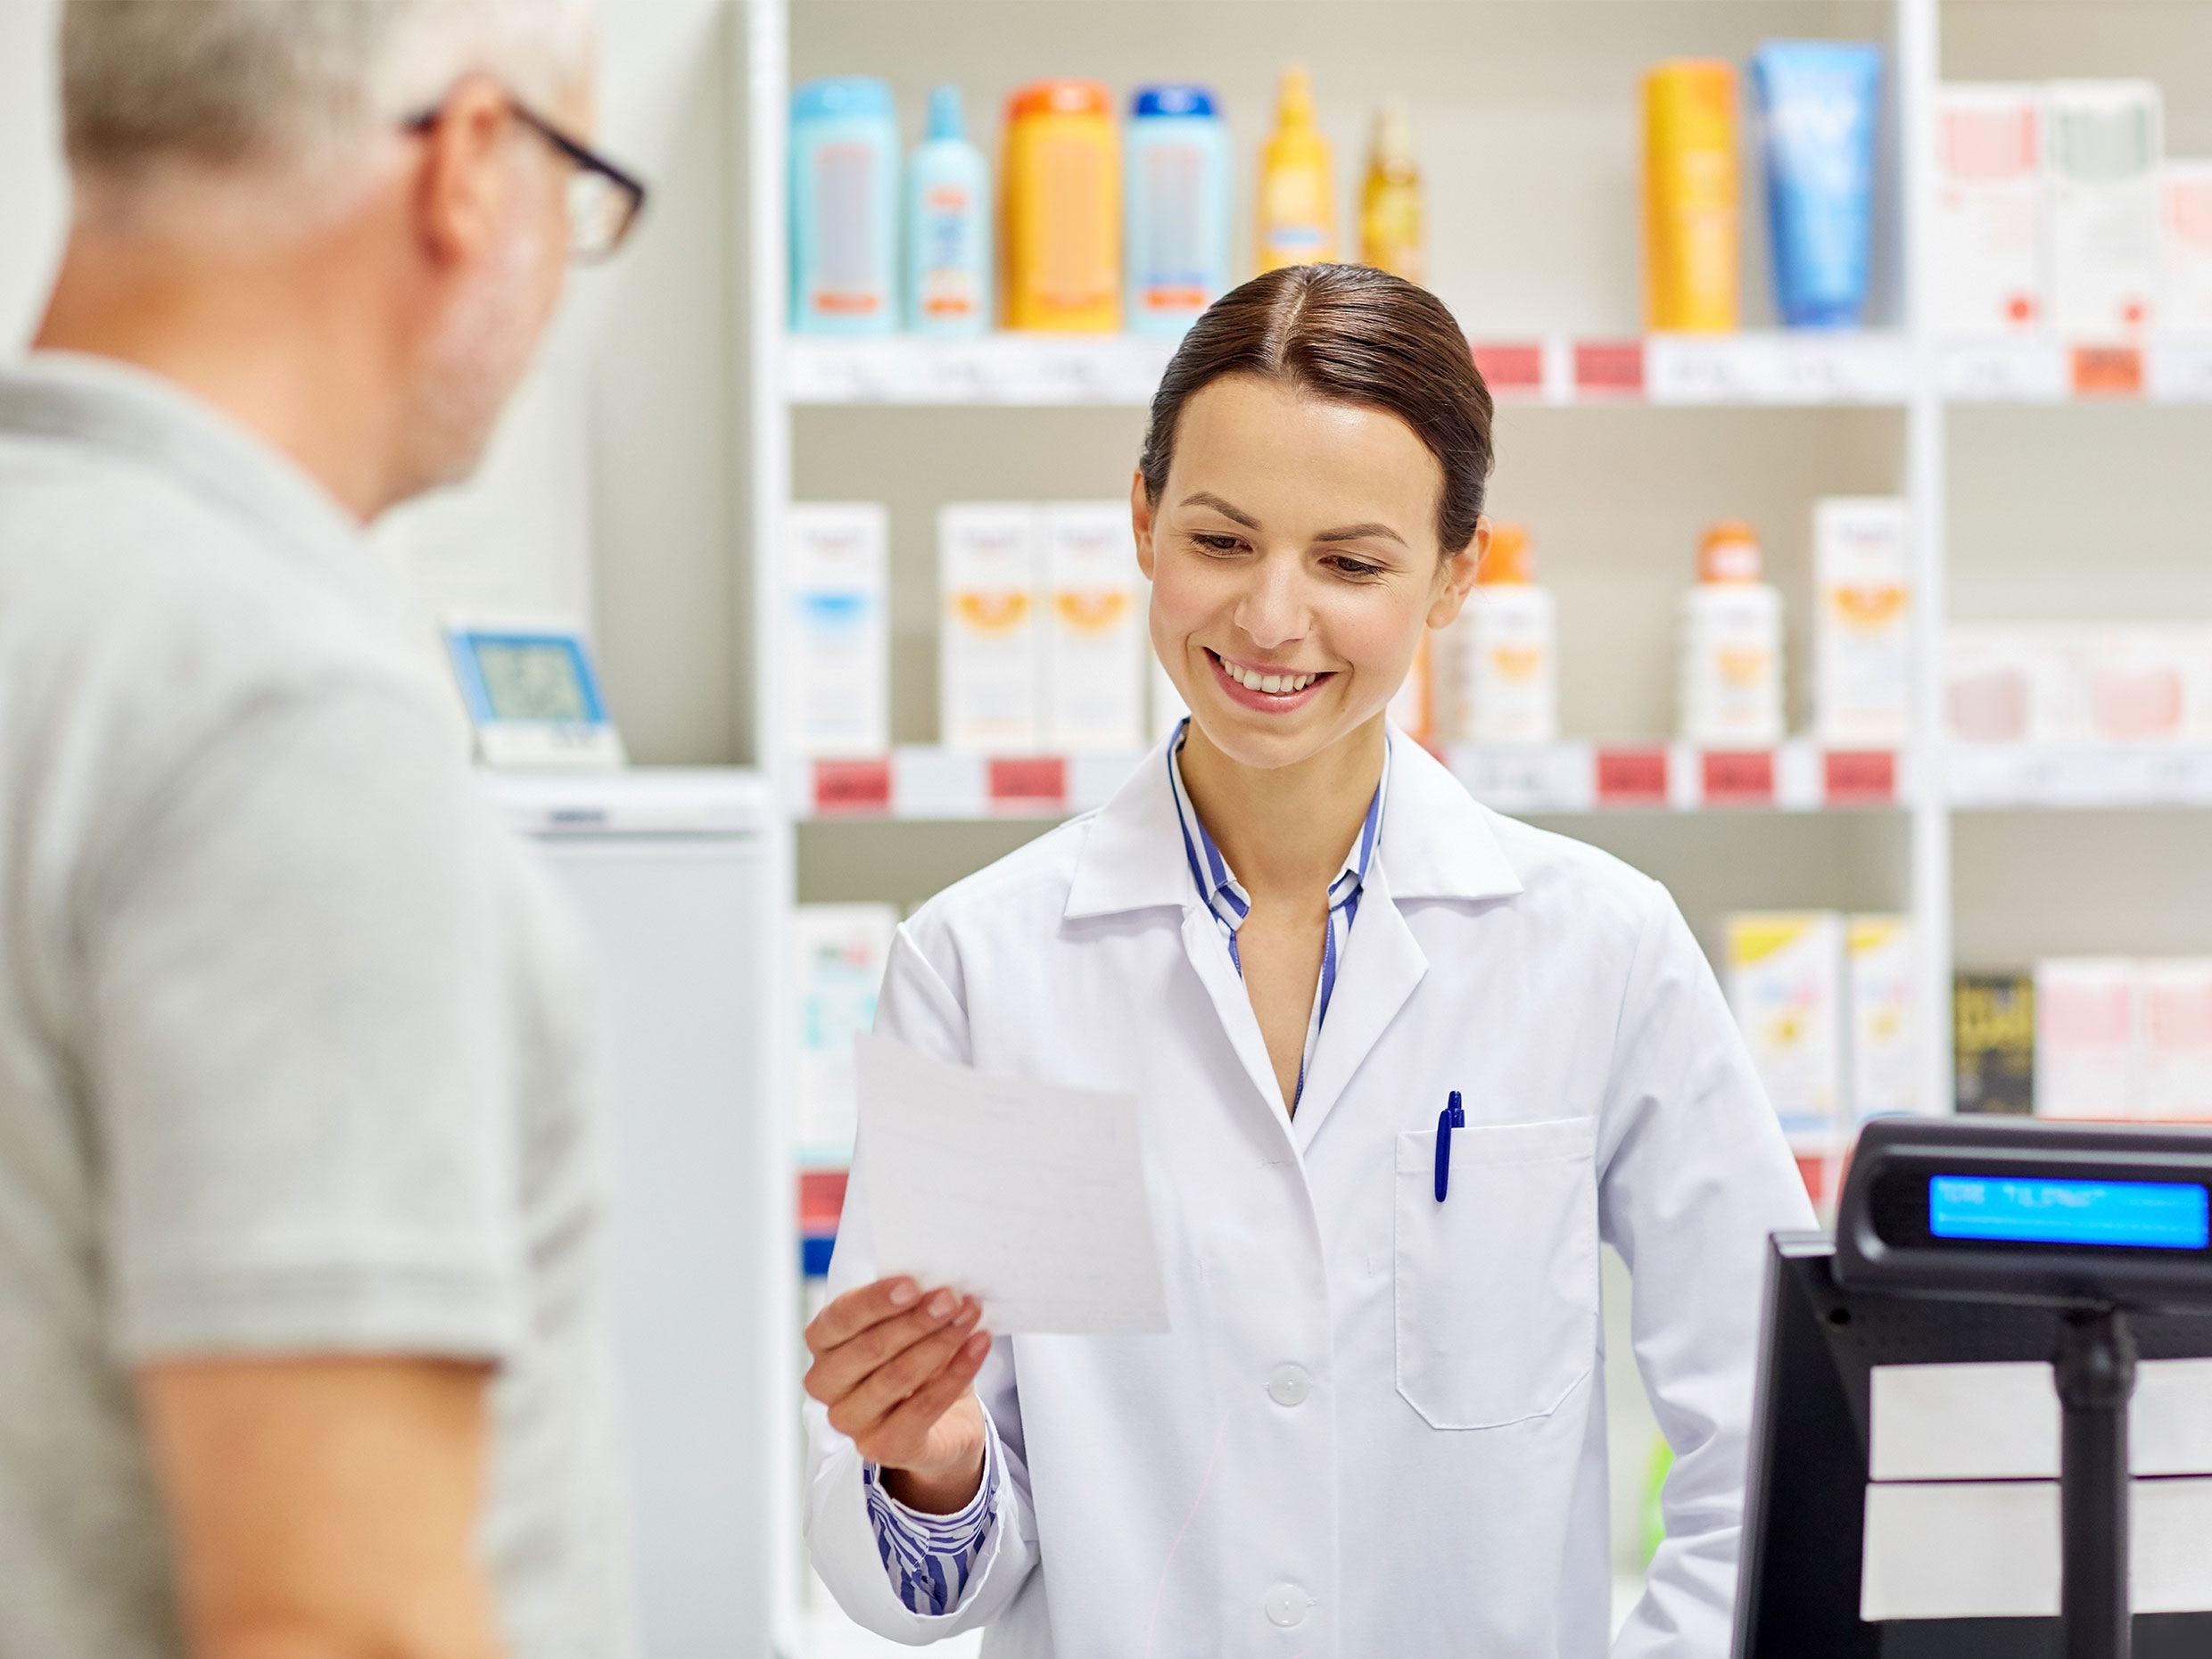 Woman in lab coat standing behind pharmacy counter and holding a piece of paper, with customer facing her from the other side of the counter.